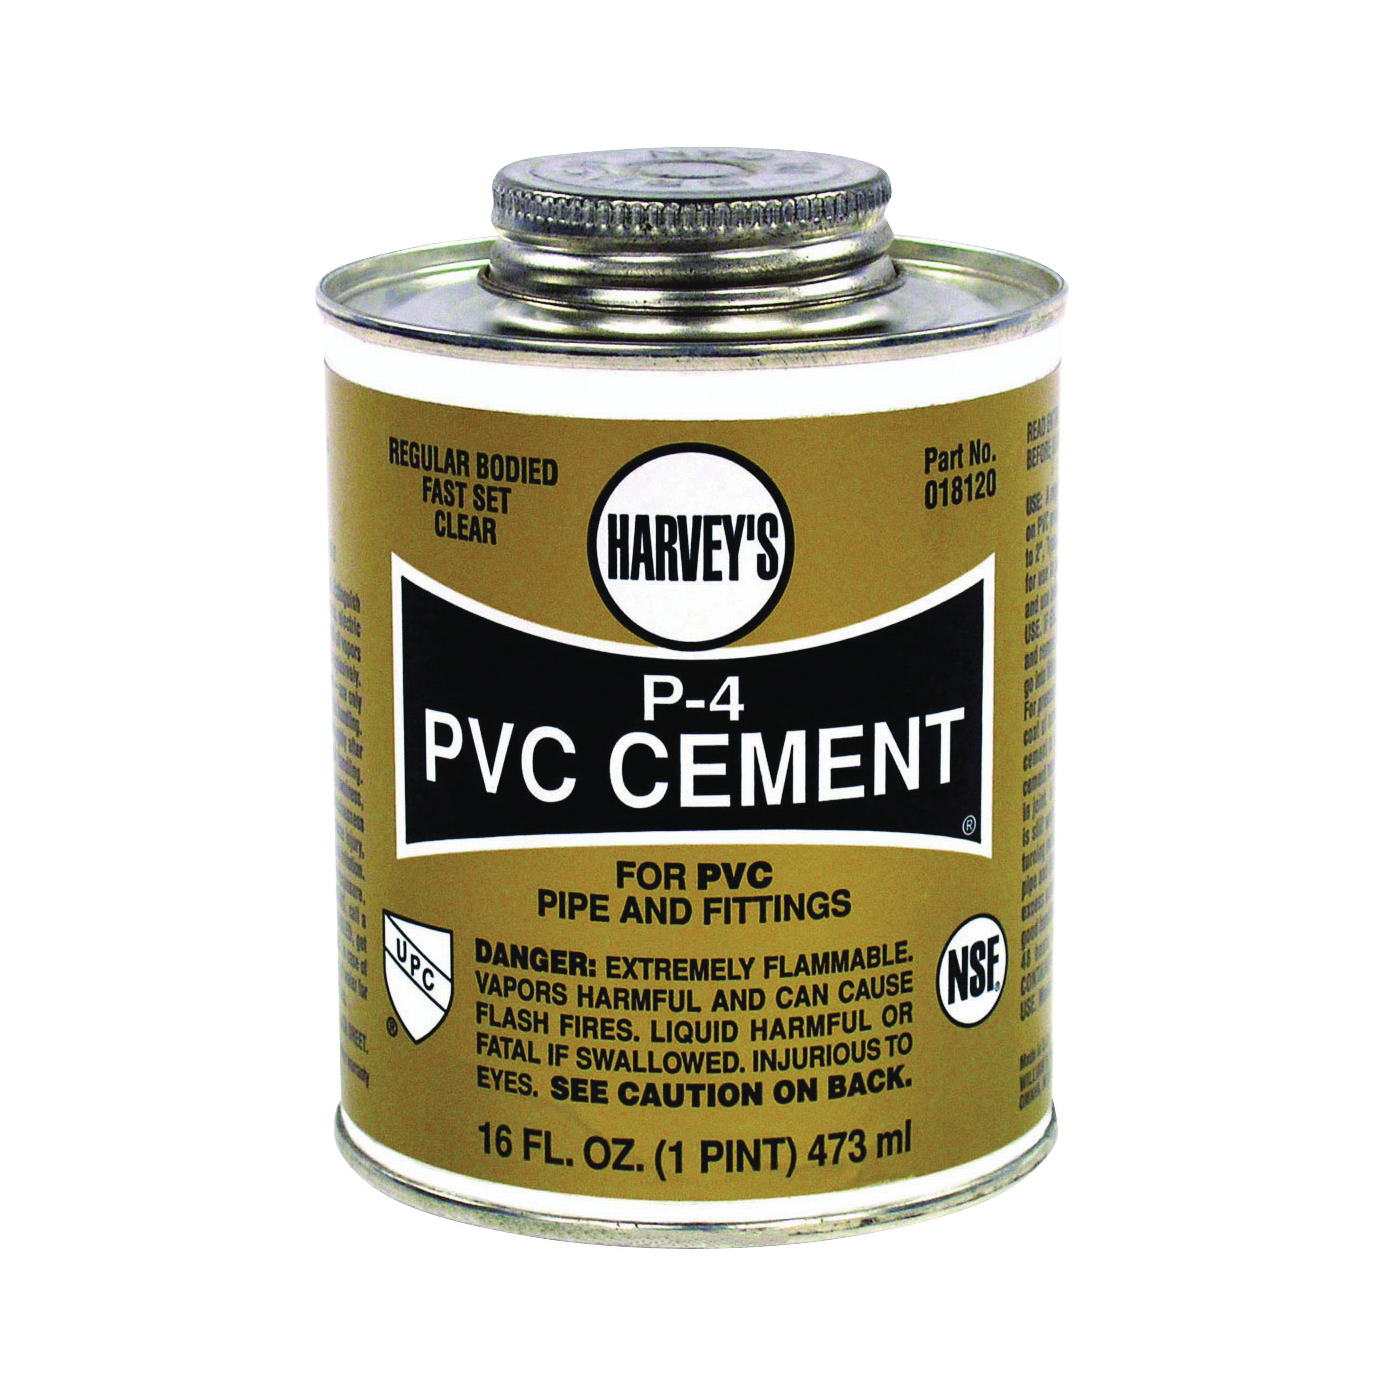 018120-12 Solvent Cement, 16 oz Can, Liquid, Clear